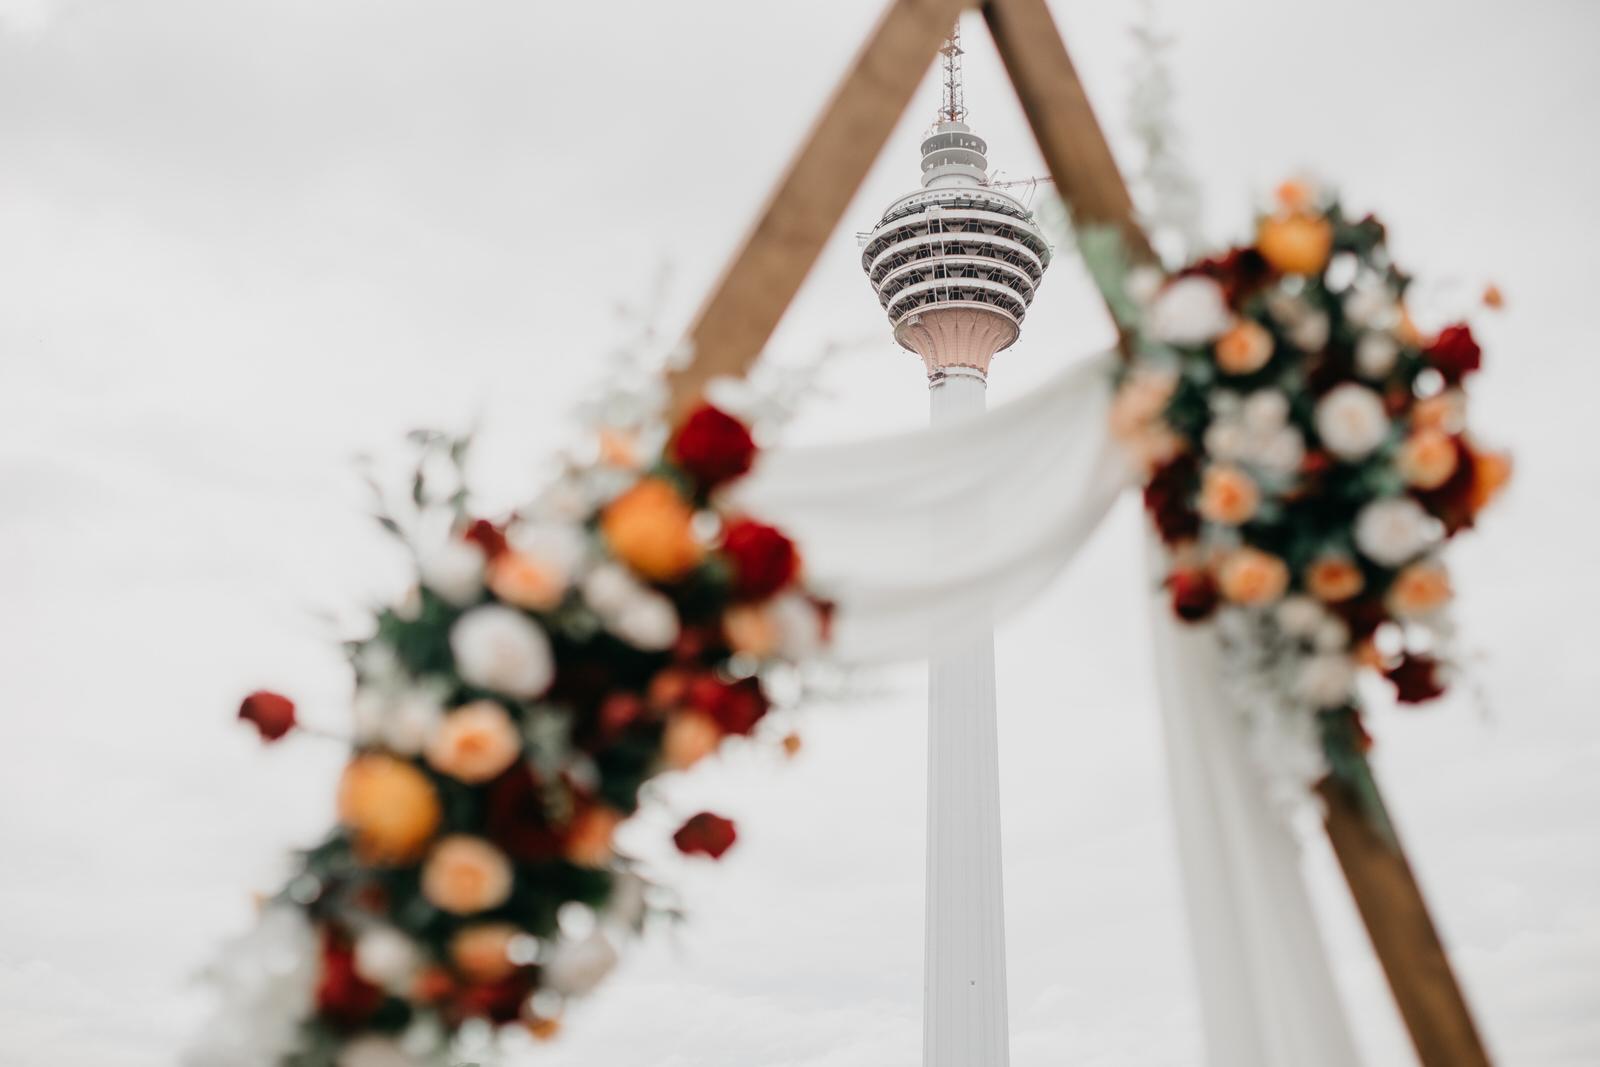 Vow Rings Exchange Boho Deco Rooftop Poolside Wedding at Hotel Stripes Kuala Lumpur MCO2.0 Cliff Choong Photography Malaysia Covid19 ROM